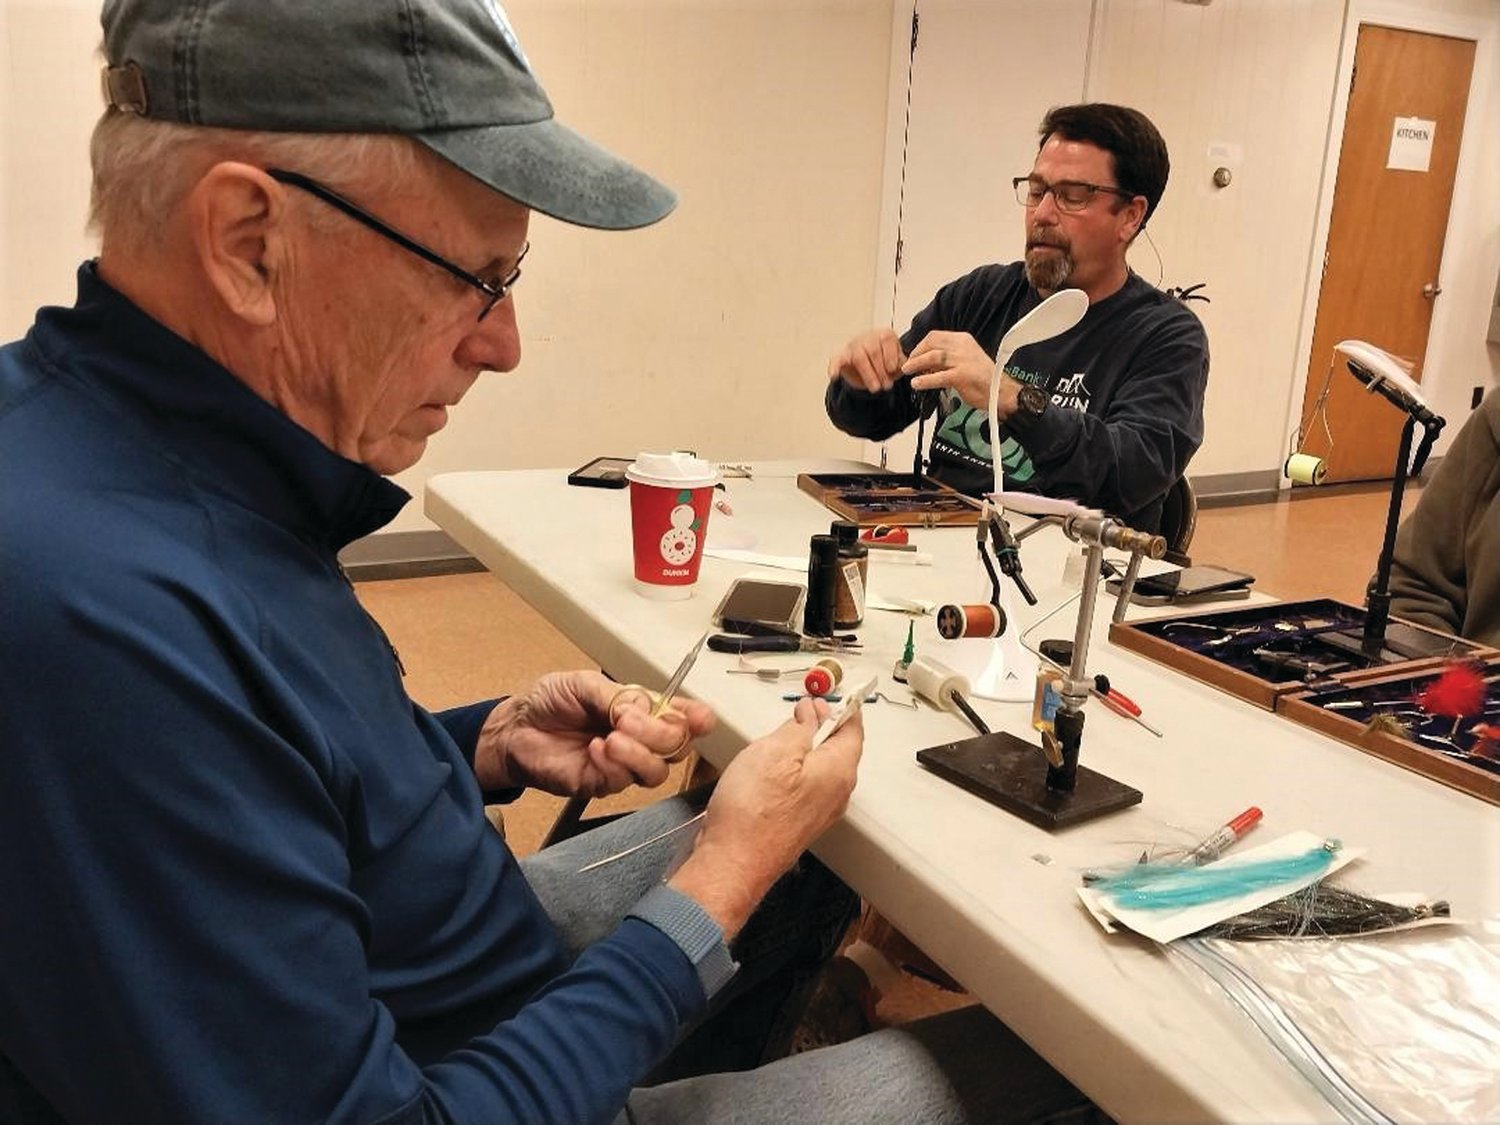 FLY TYING: Peter Burgess of Warwick instructs student Frank Flowers of Portsmouth at DEM’s fly tying program Monday evenings. Visit https://dem.ri.gov/events/fall-fly-tying-workshop.